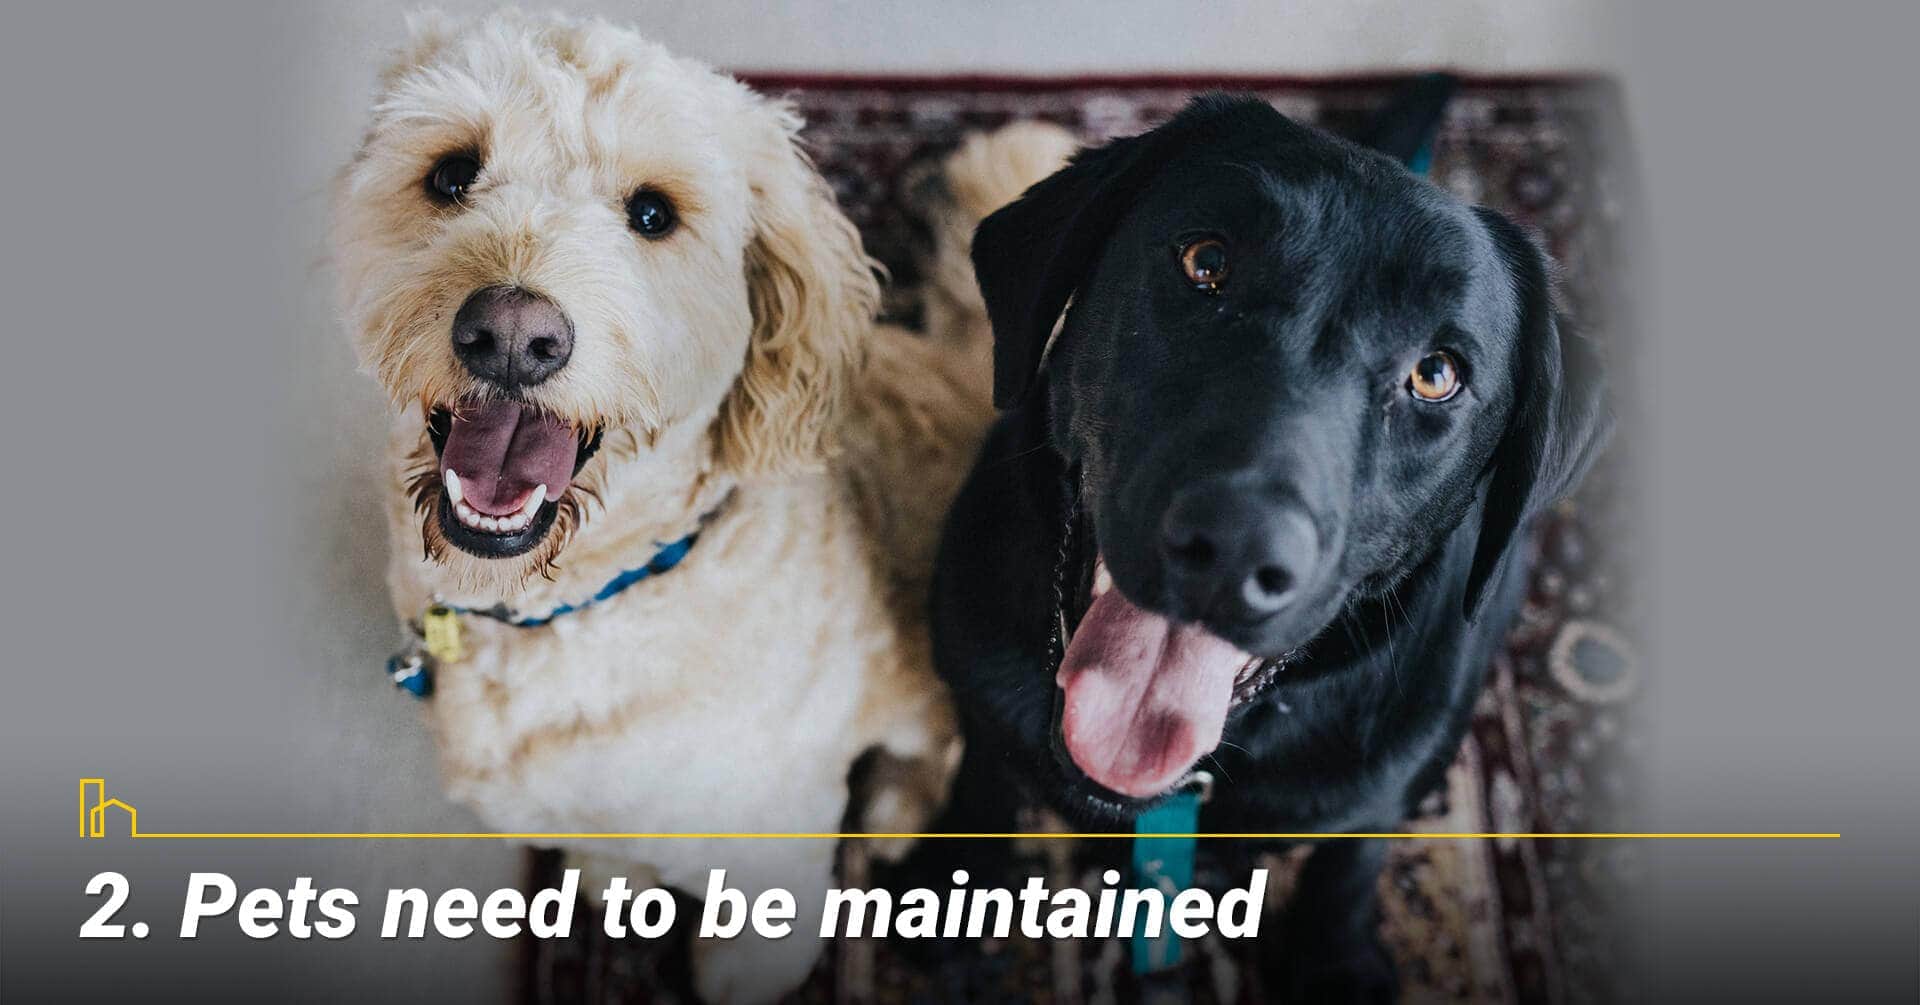 Pets need to be maintained, keep your pet in designated areas